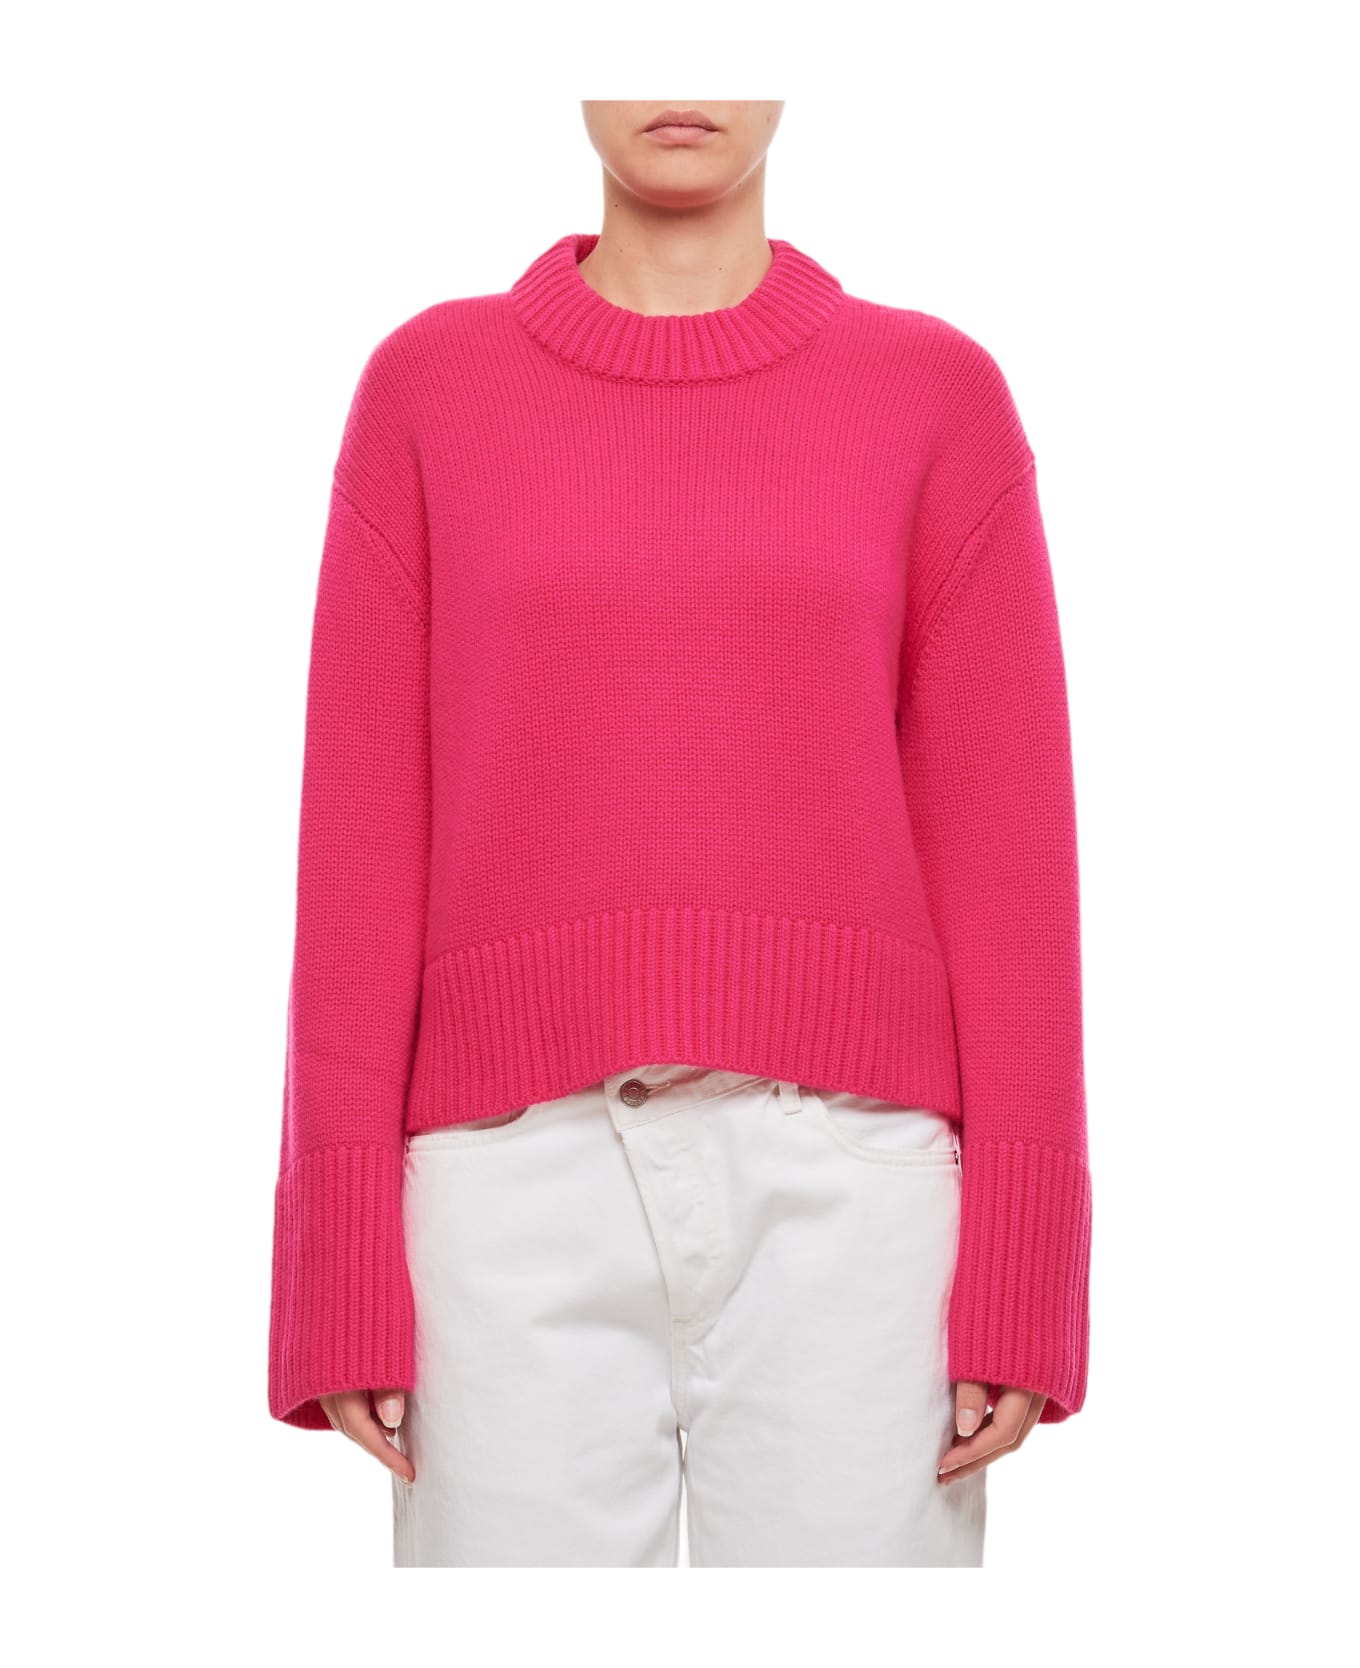 Lisa Yang Sony Cashmere Sweater - Pink